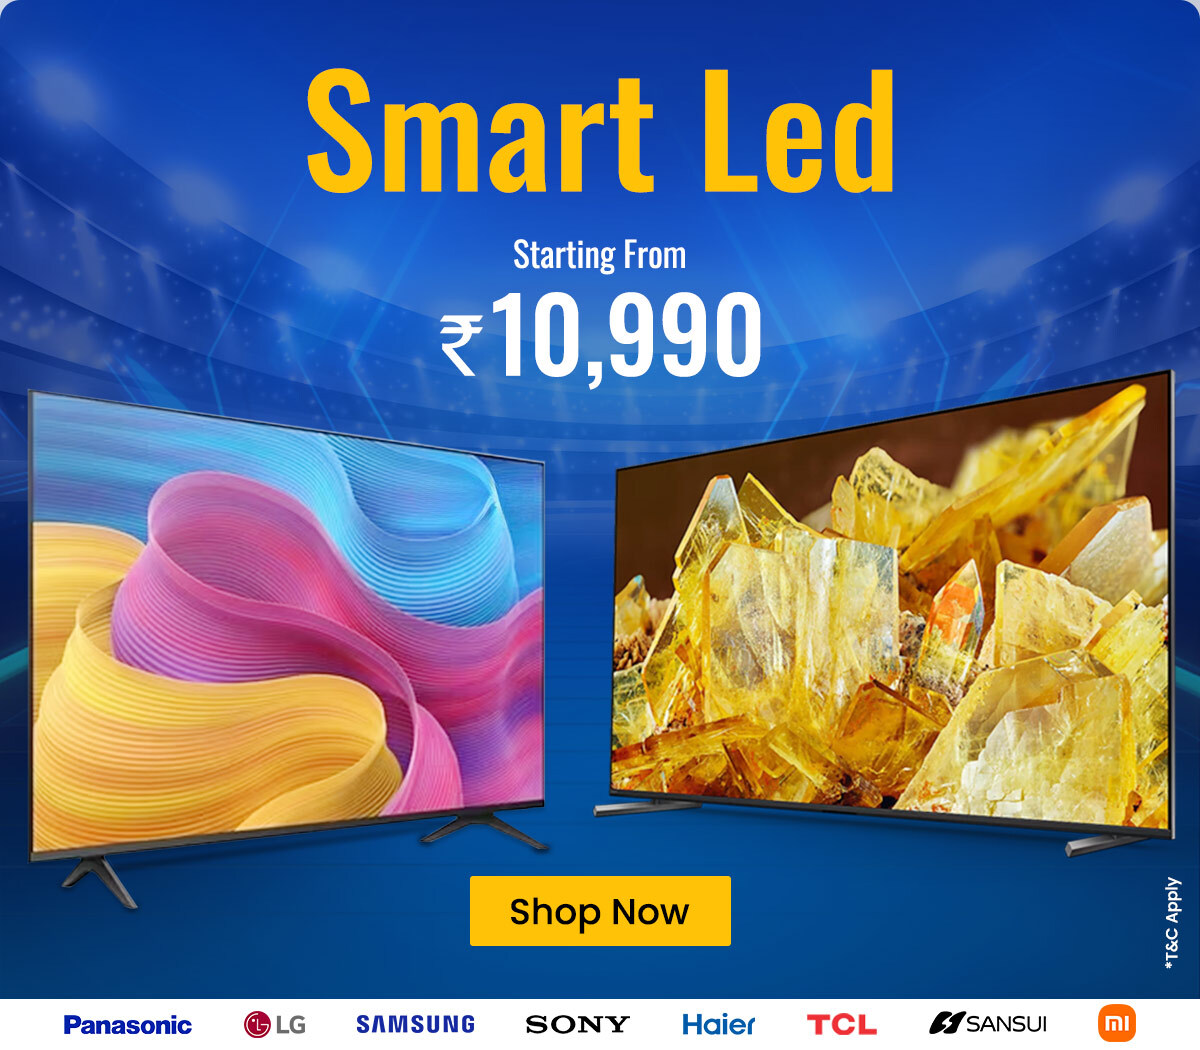 Smart LED at Lowest Price